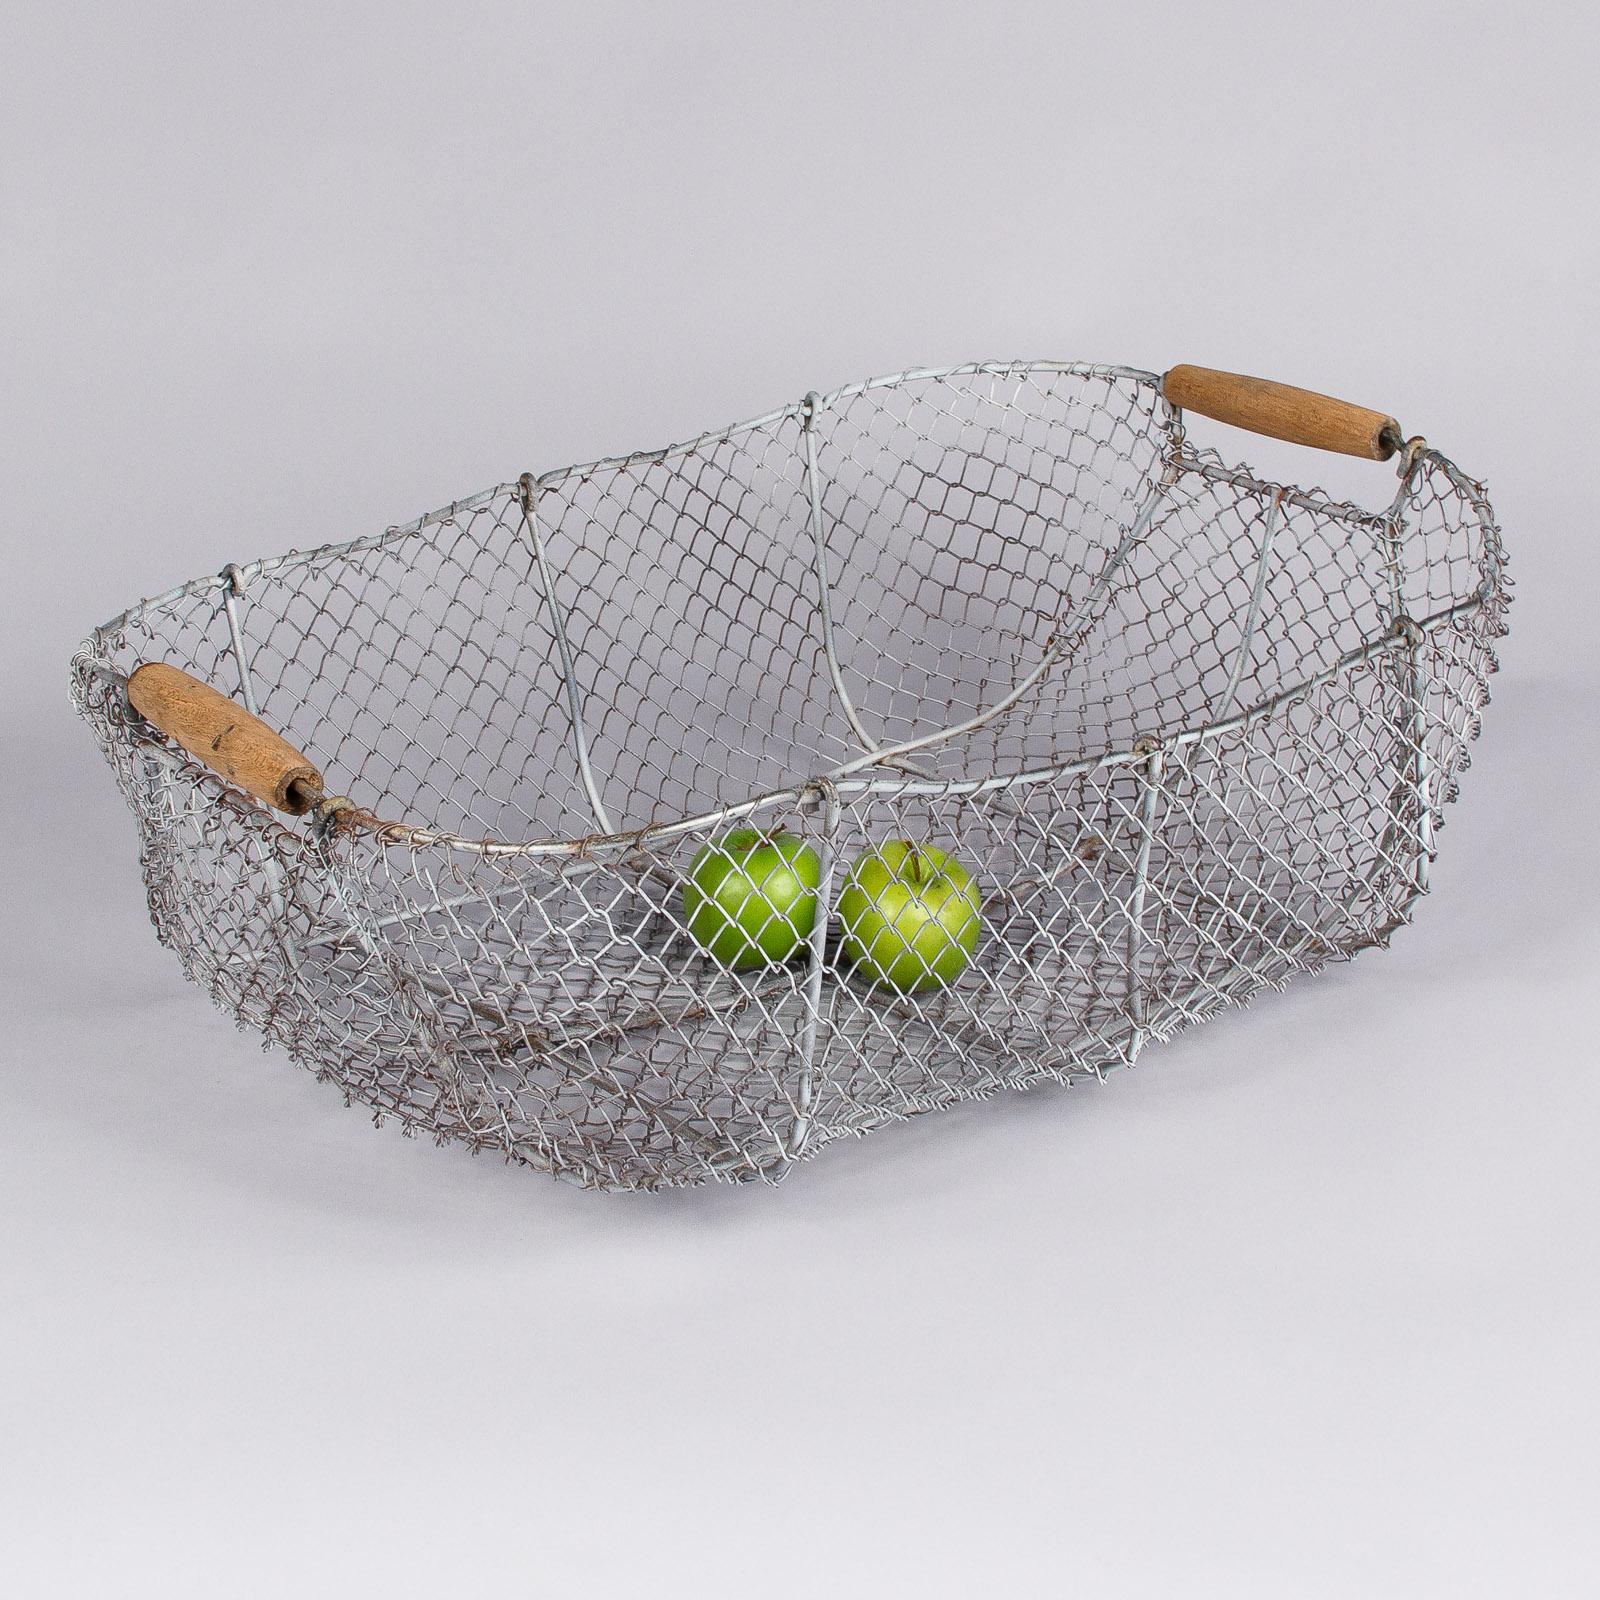 antique wire baskets for sale